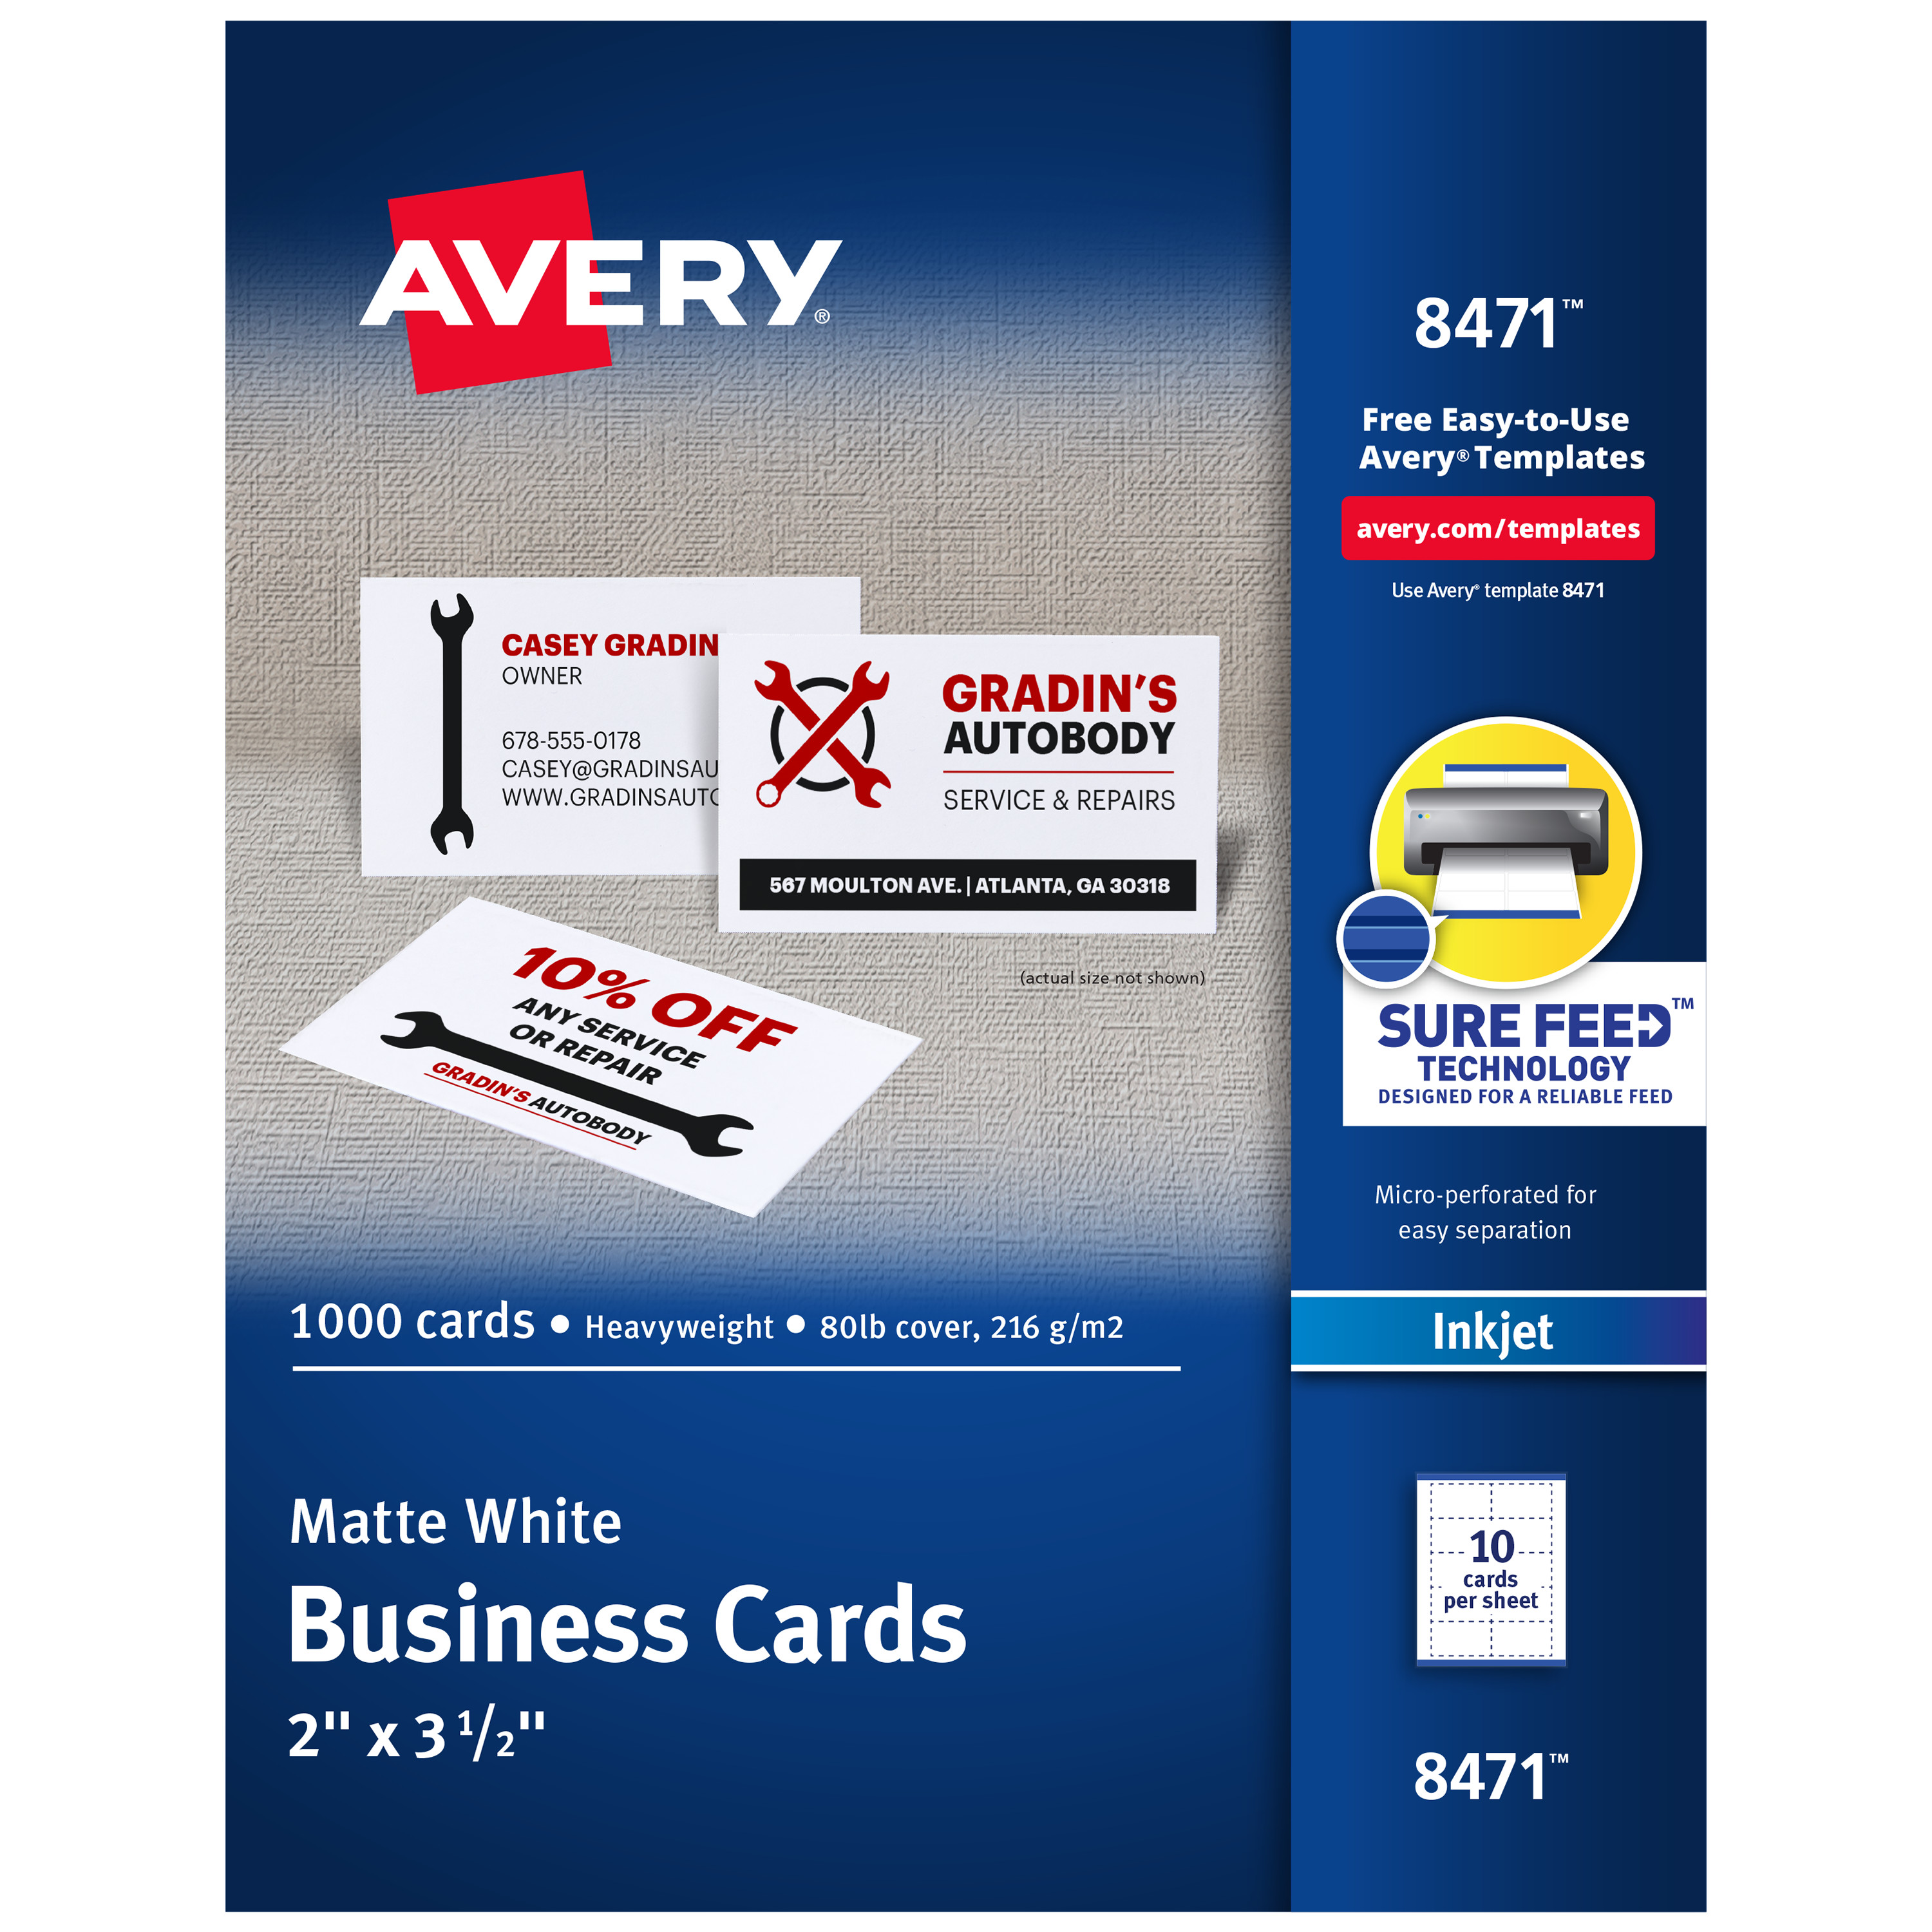 Avery 2" x 3.5" Business Cards, Sure Feed(R), 1,000 Cards (8471) - image 1 of 8